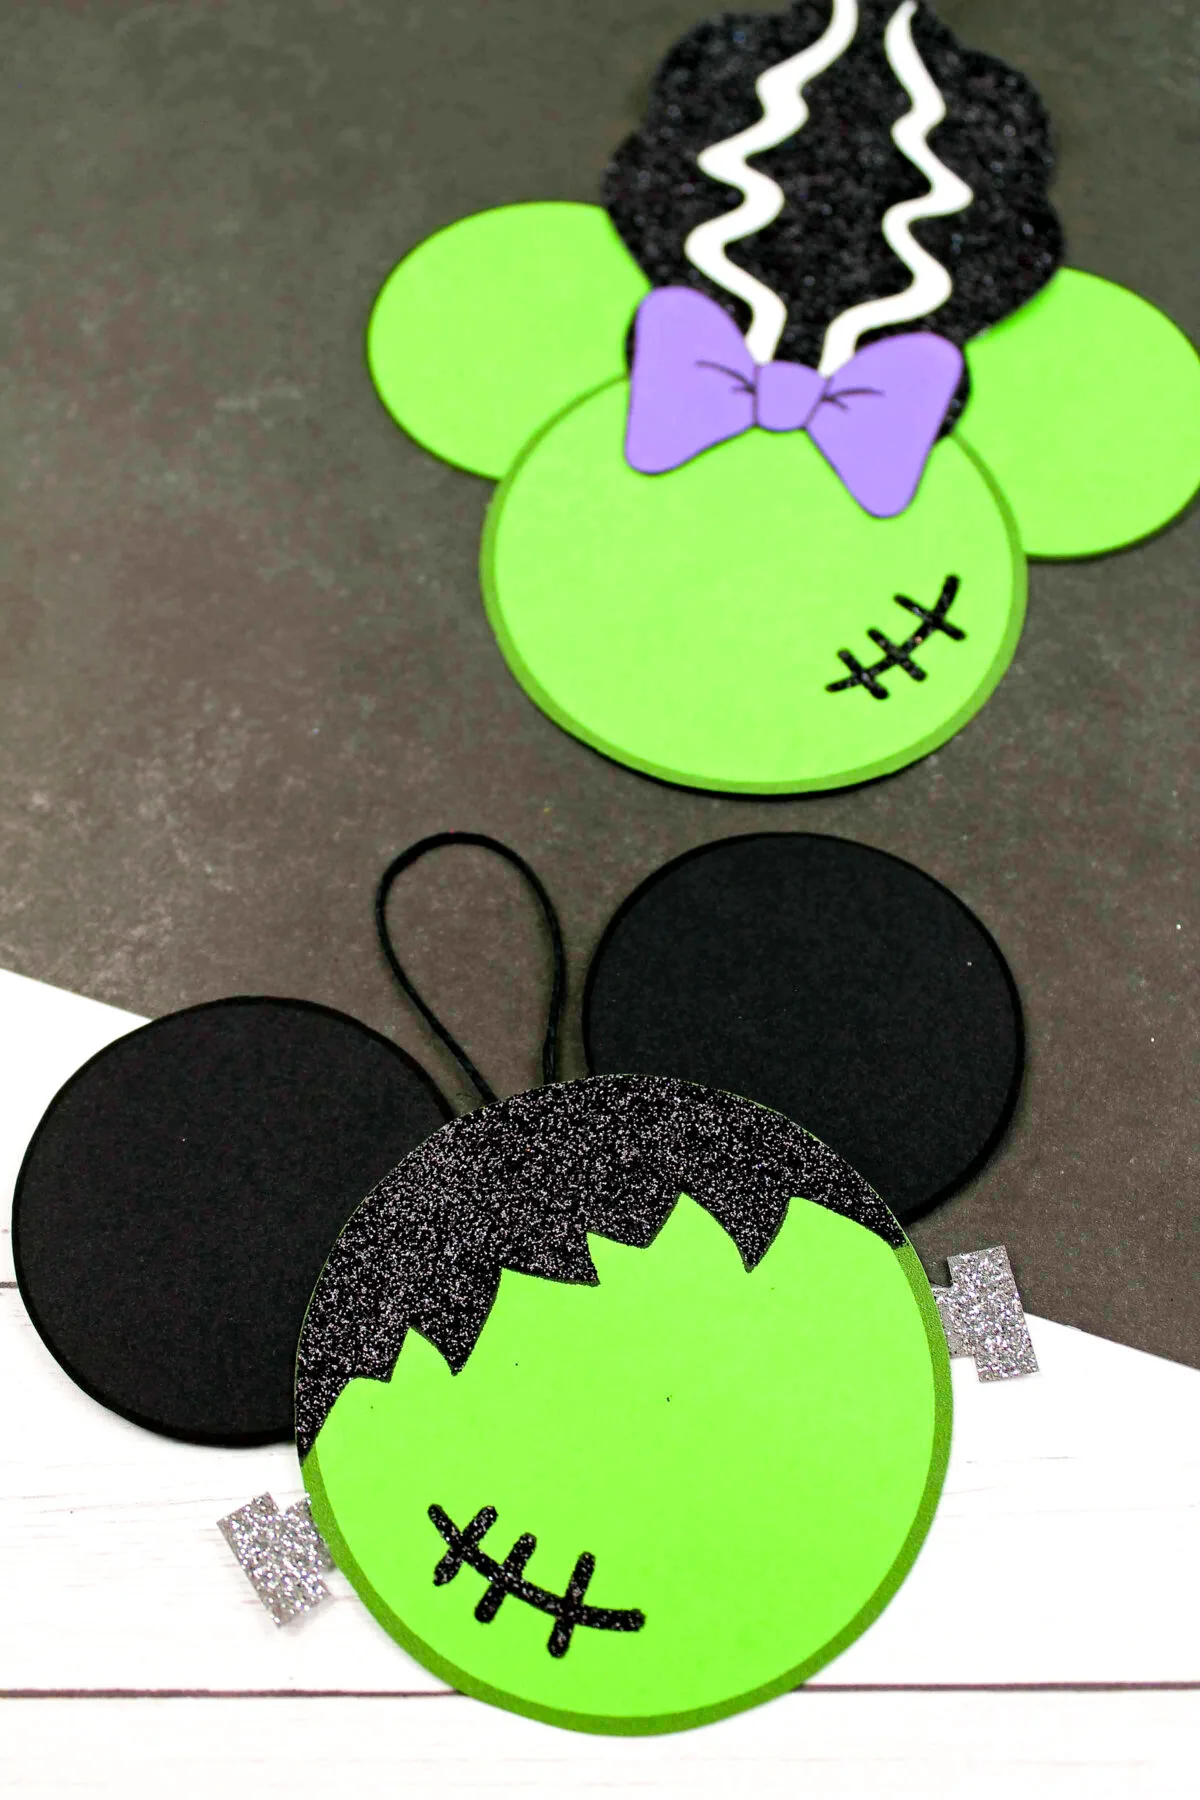 Make this easy DIY Frankenstein Mickey ears ornament for your Christmas tree. Easy, fun, and festive craft for anyone into spooky things!